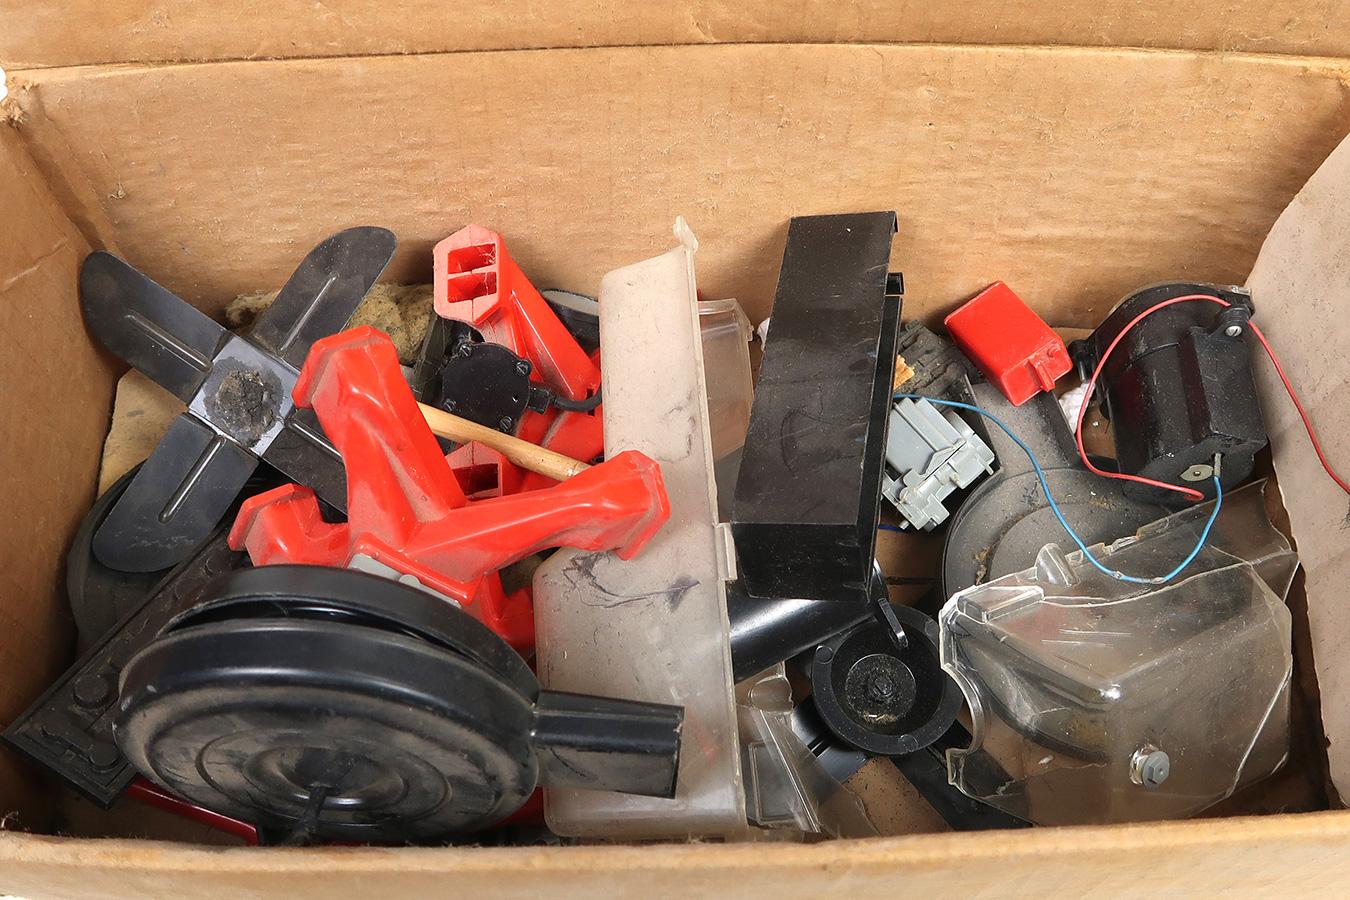 Model Engines (3), two visible type & a Nascar straight 8 w/controls, Good+